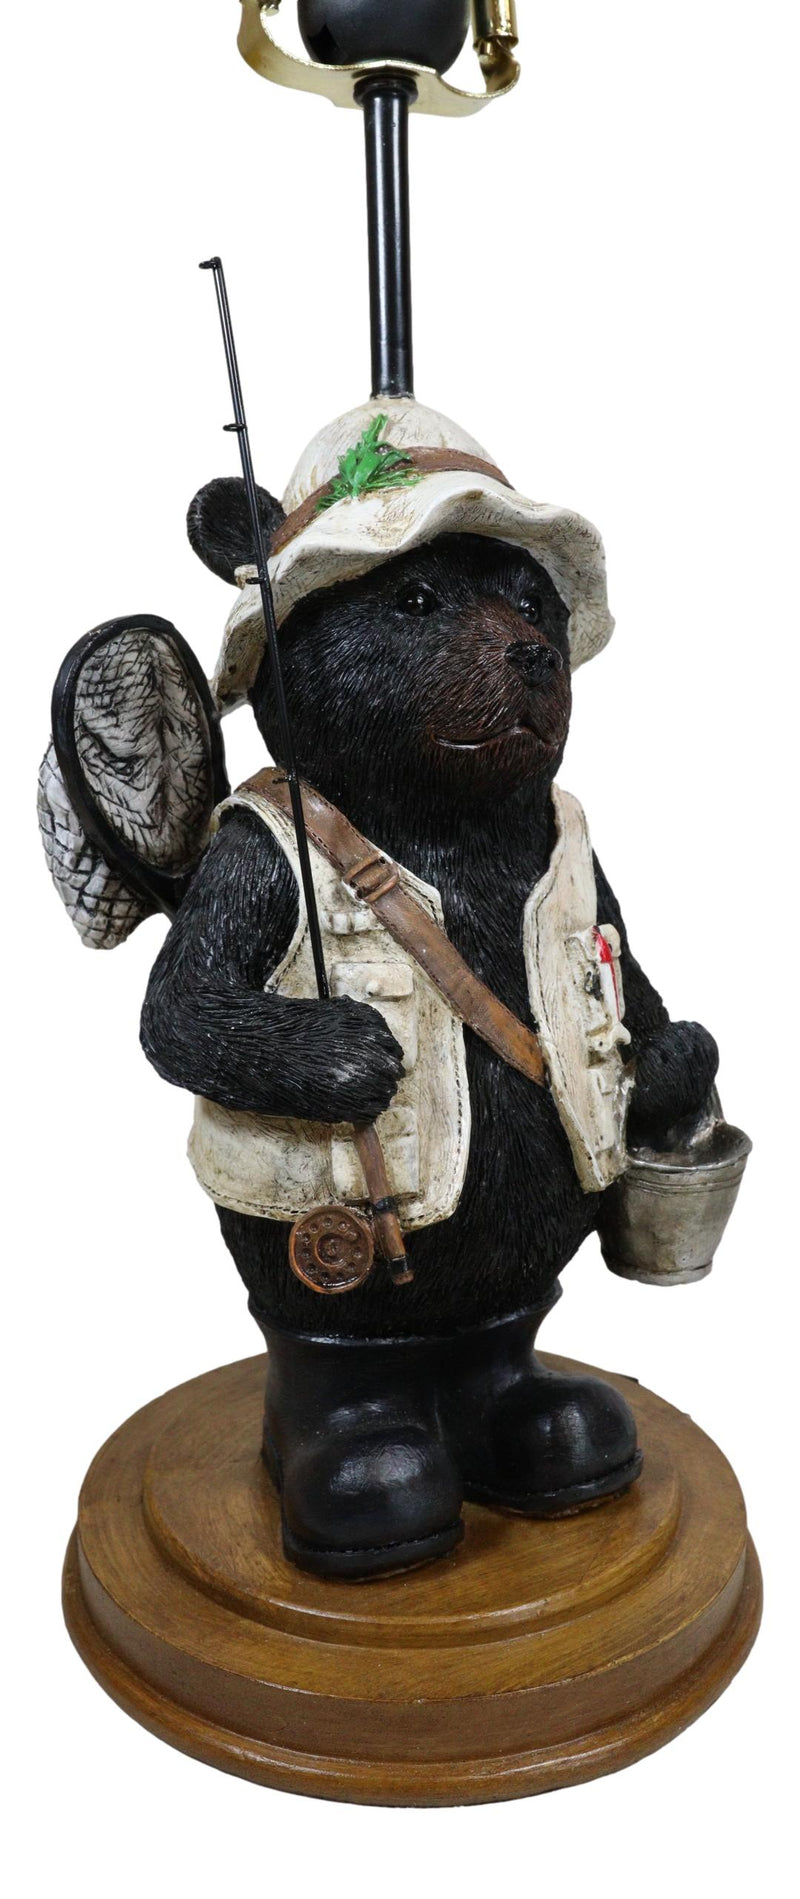 Camping Fisherman Angler Bear Going Fishing With Pole Net And Bucket Table Lamp